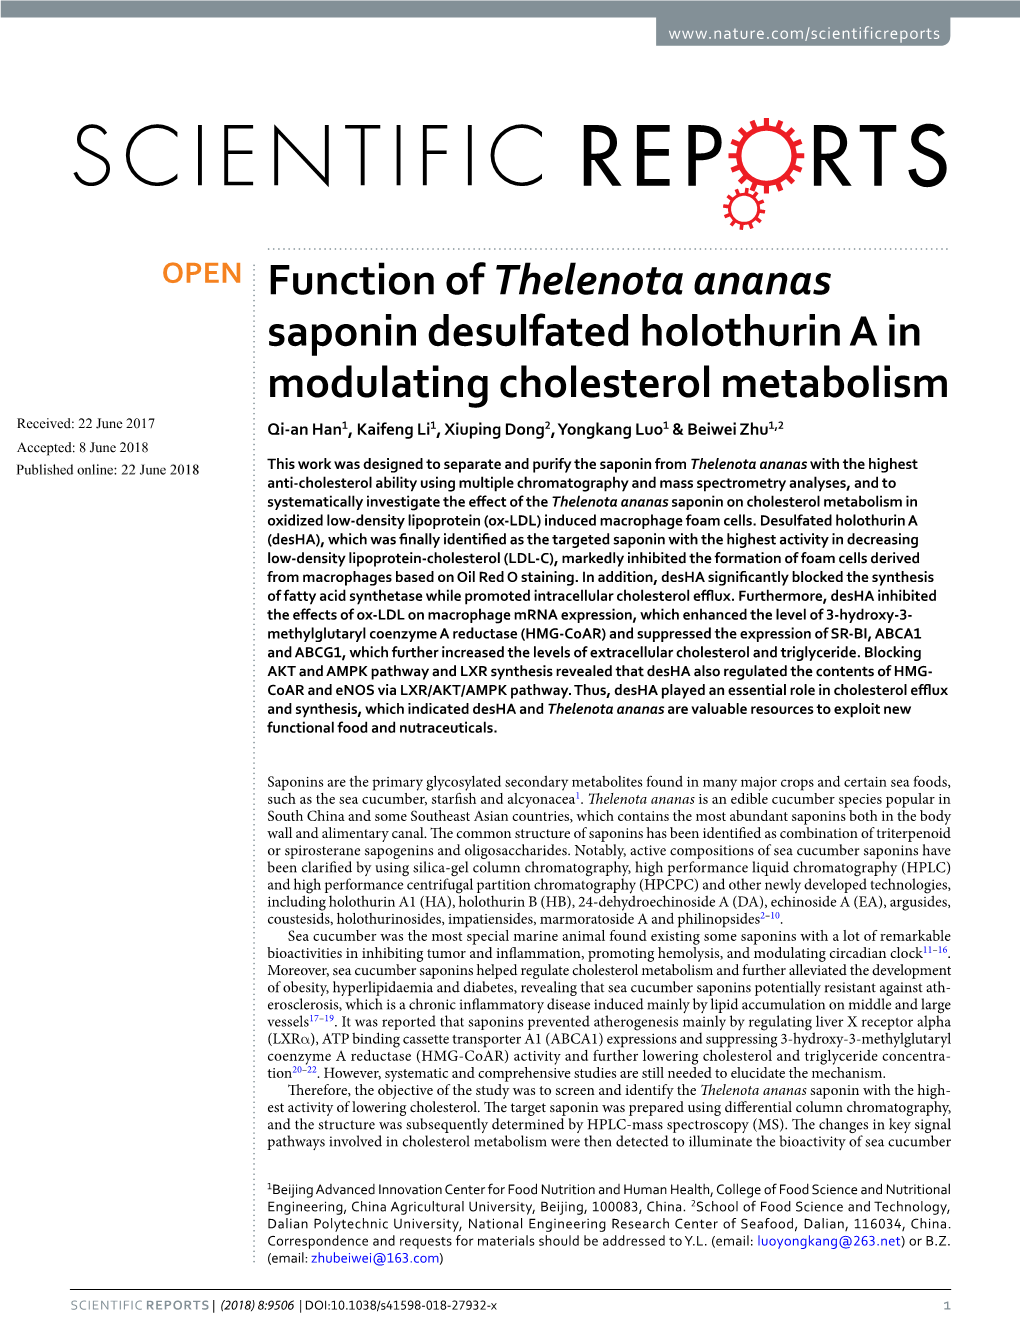 Function of Thelenota Ananas Saponin Desulfated Holothurin a In